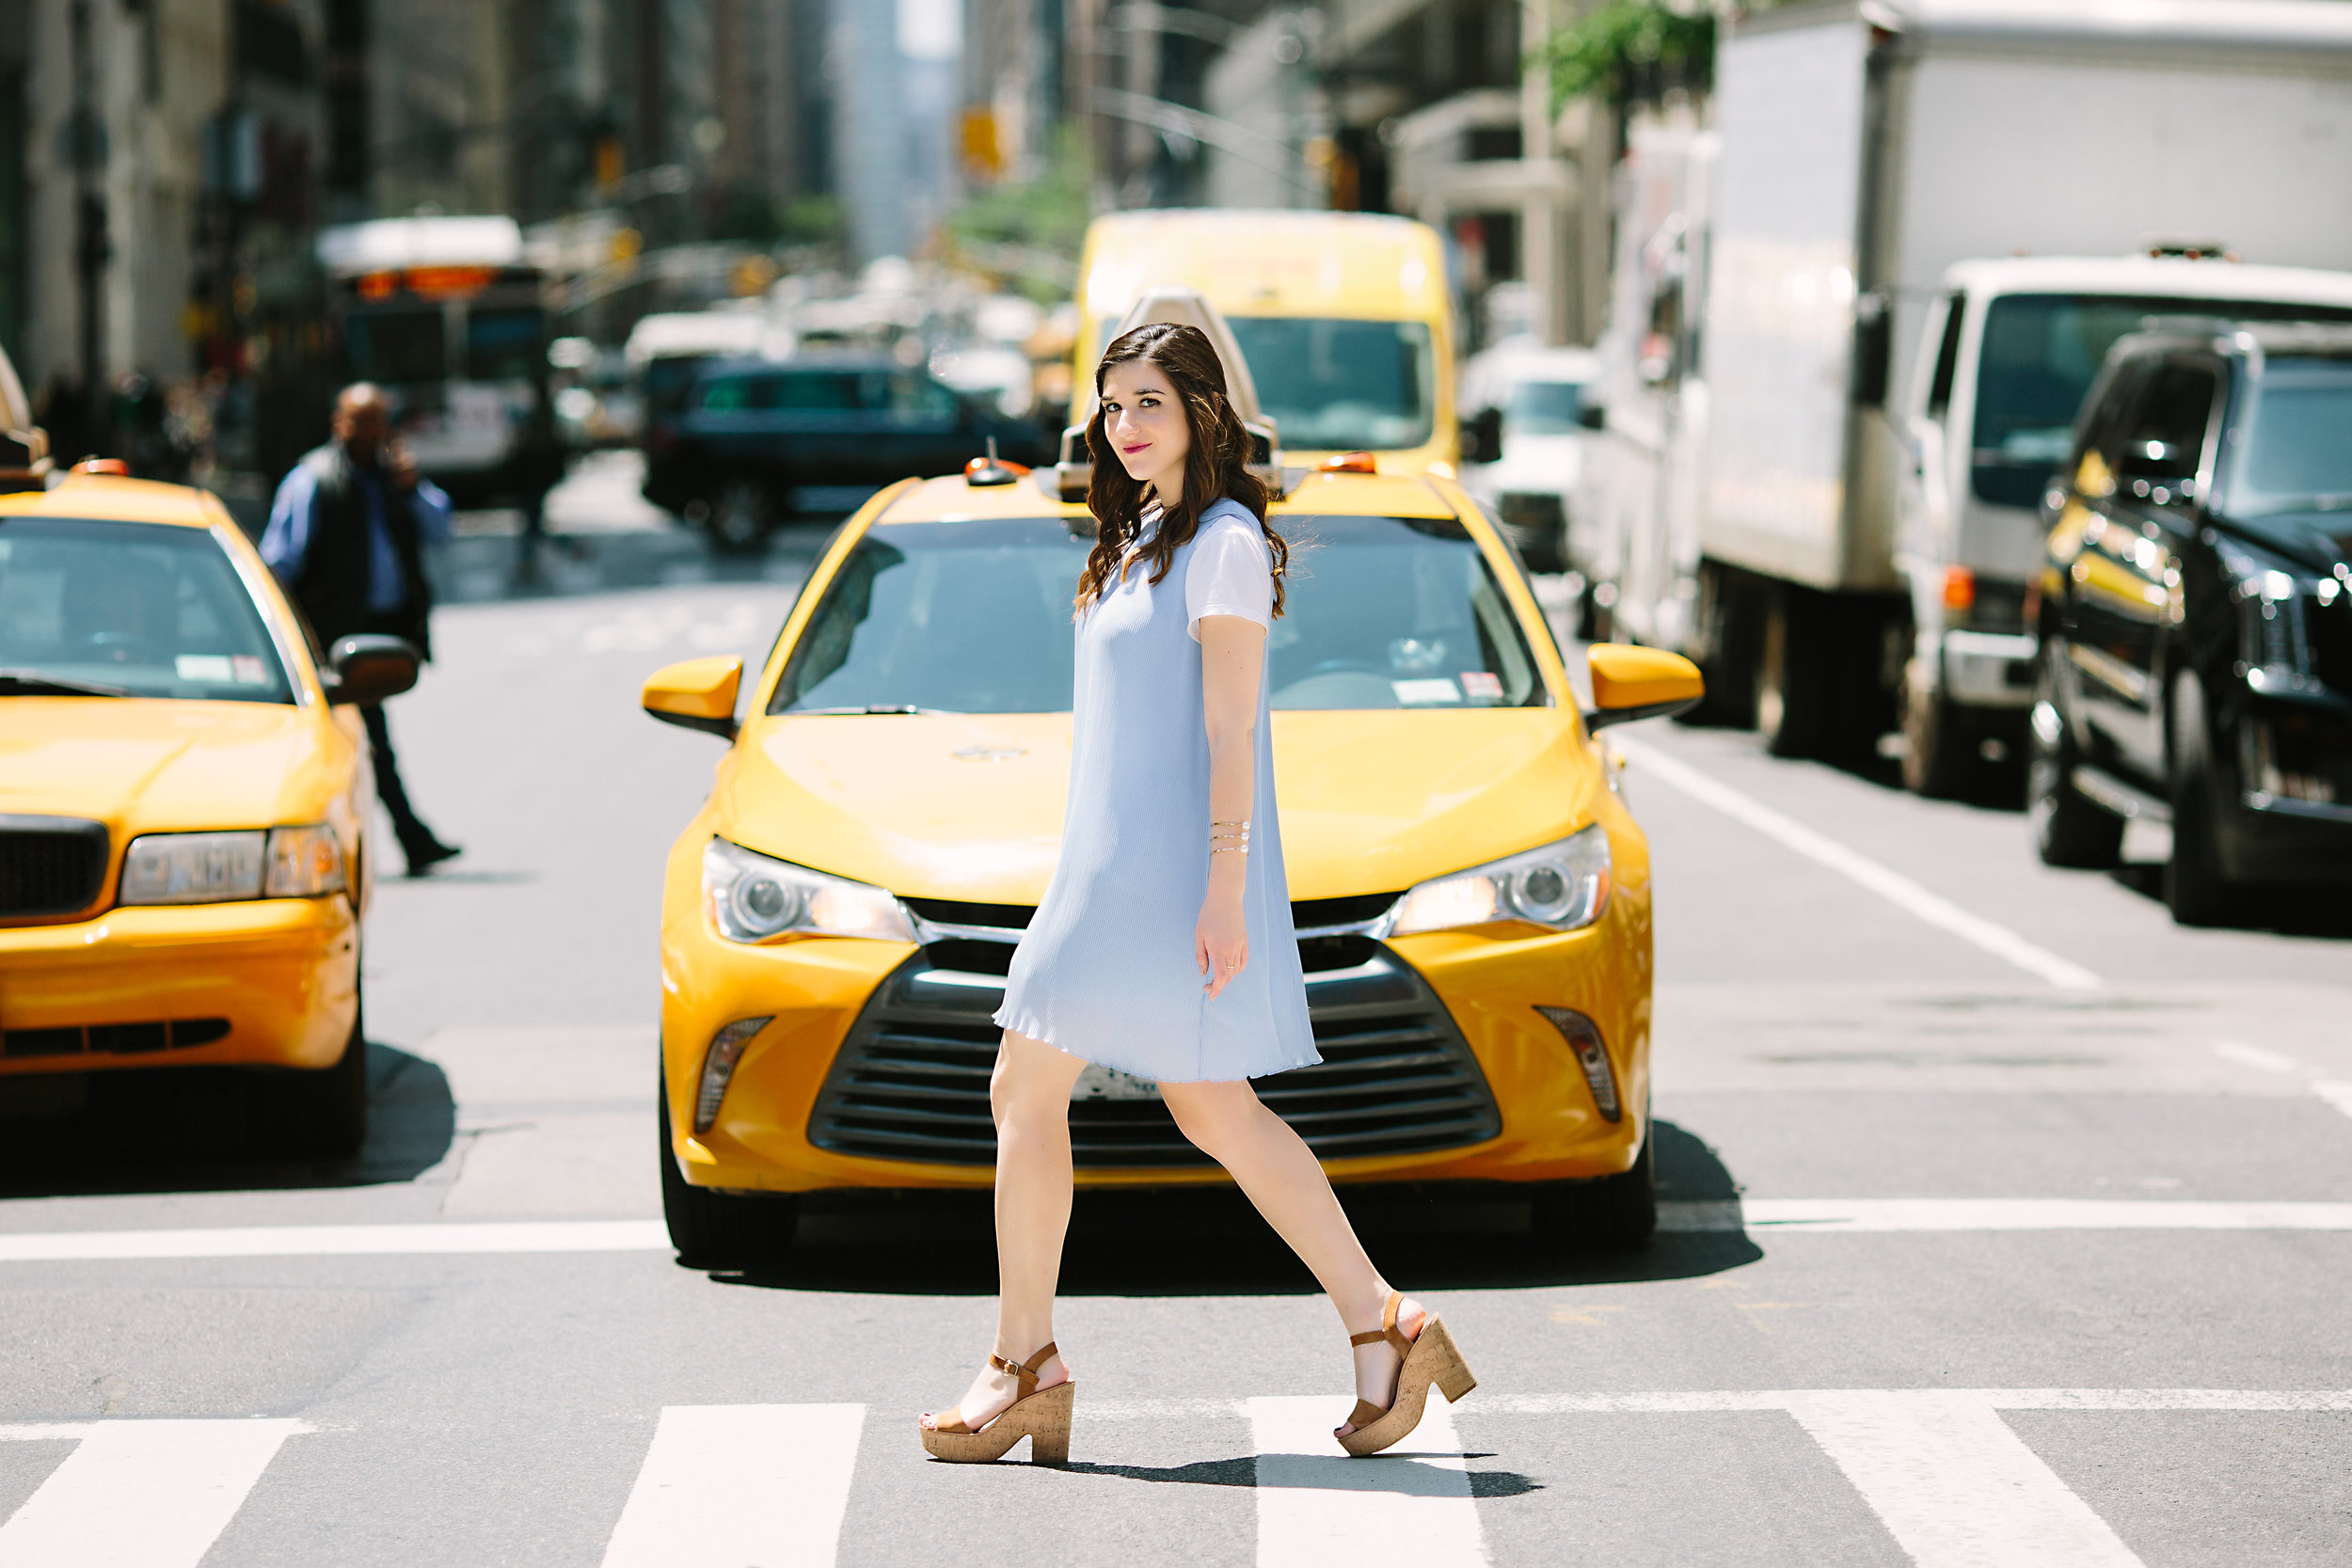 Pastel Blue Pleated Dress Keepsake The Label Louboutins & Love Fashion Blog Esther Santer NYC Street Style Blogger Outfit OOTD Pretty Photoshoot Upper East Side Dolce Vita Wedges Clutch Club Monaco Gold Jewelry Women White Tee Shirt Summer Look Inspo.jpg